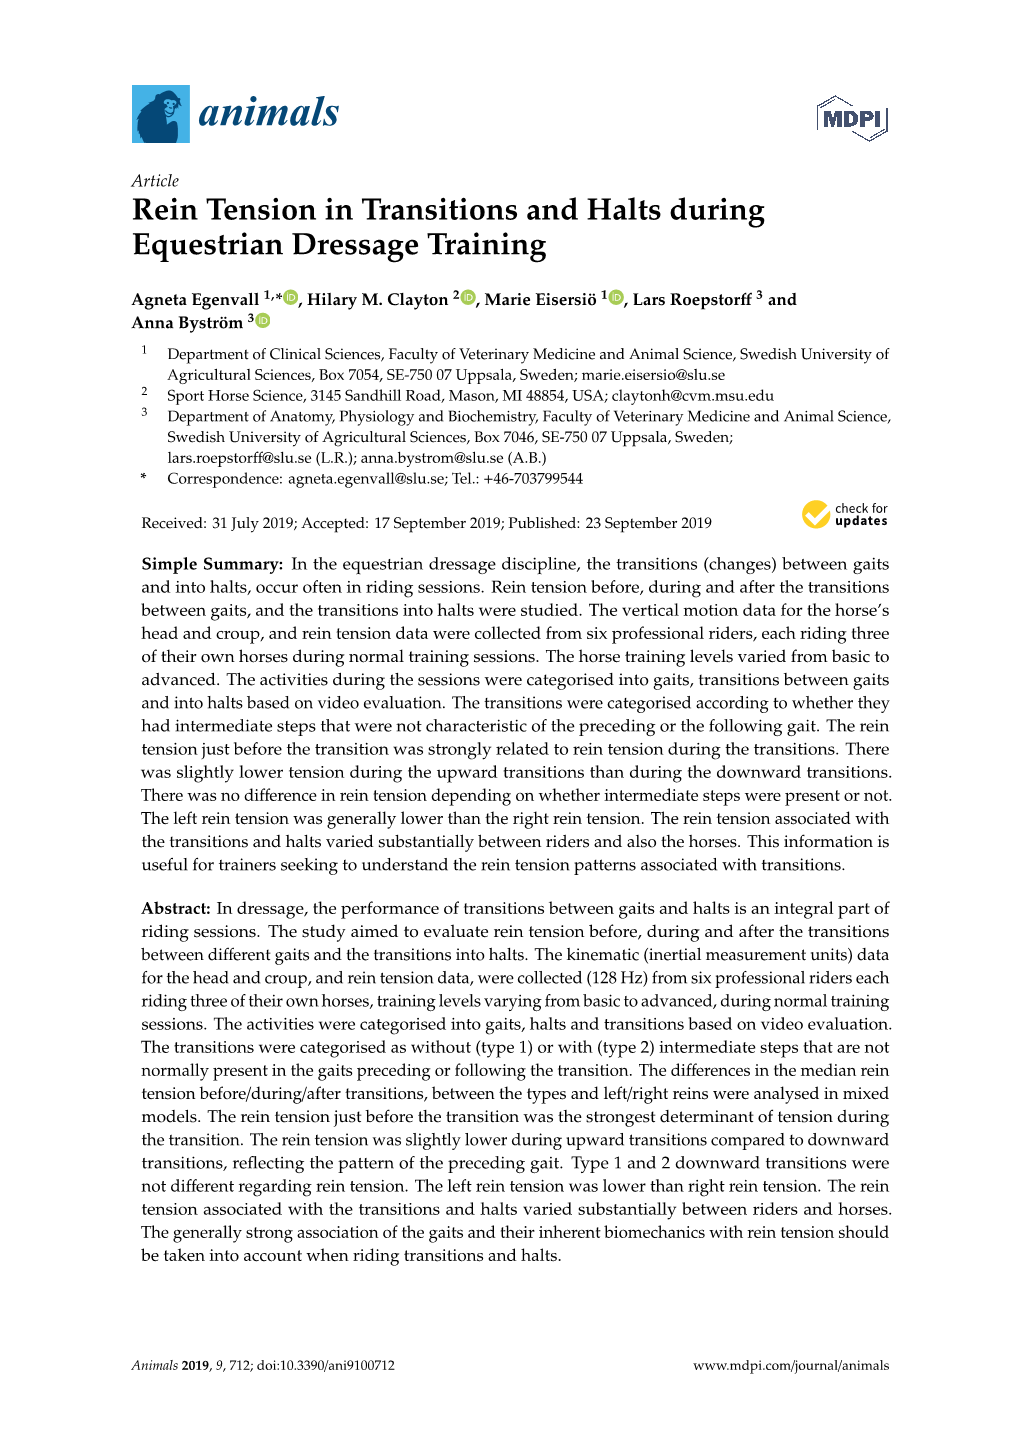 Rein Tension in Transitions and Halts During Equestrian Dressage Training